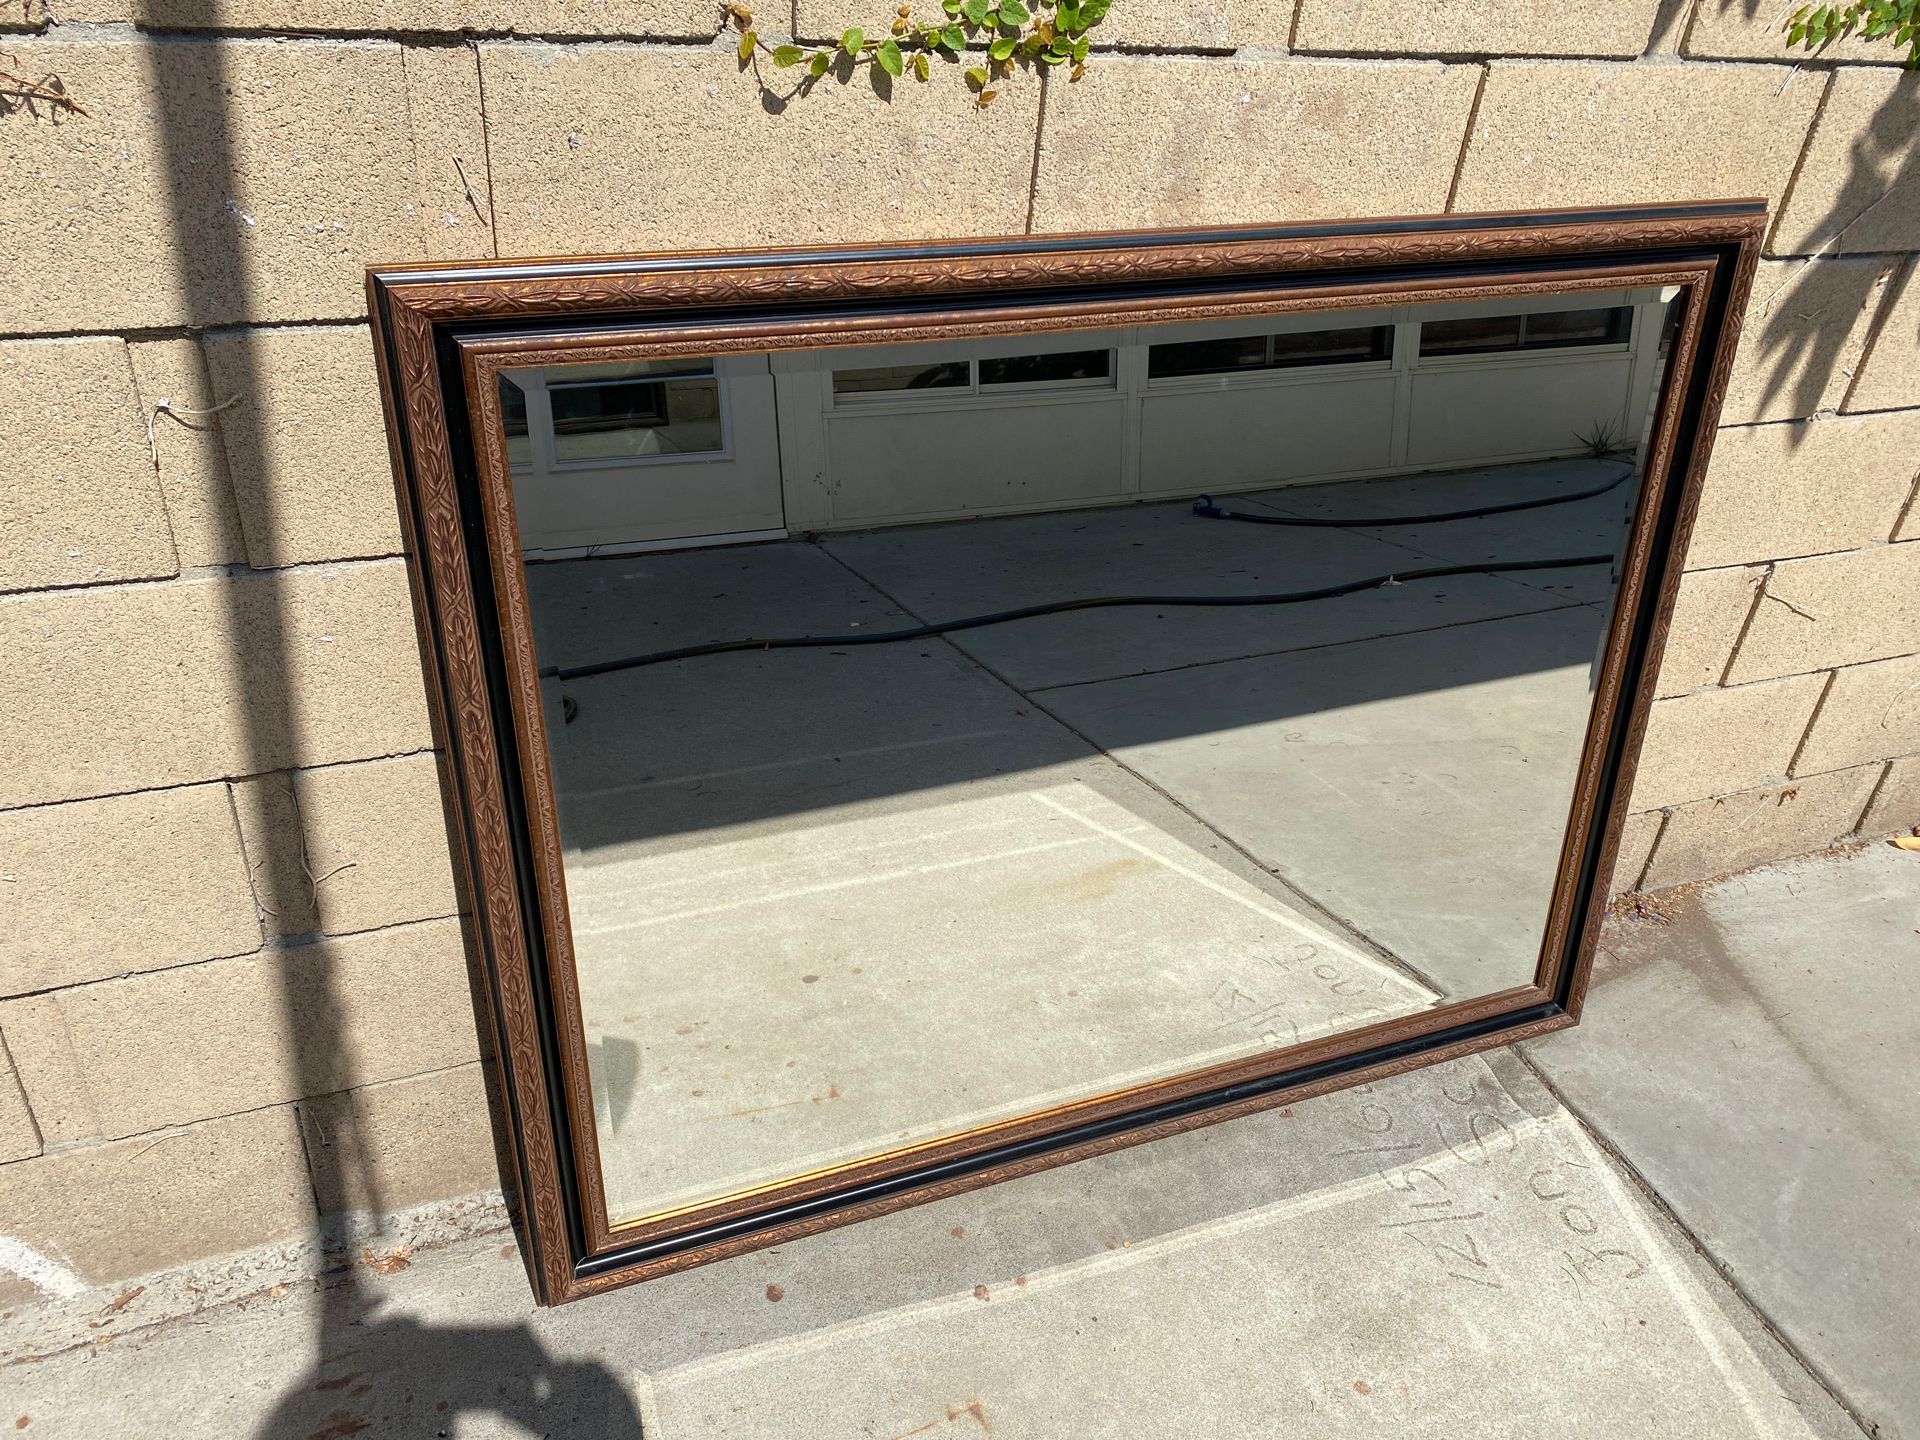 54”x 42” mirror for hanging